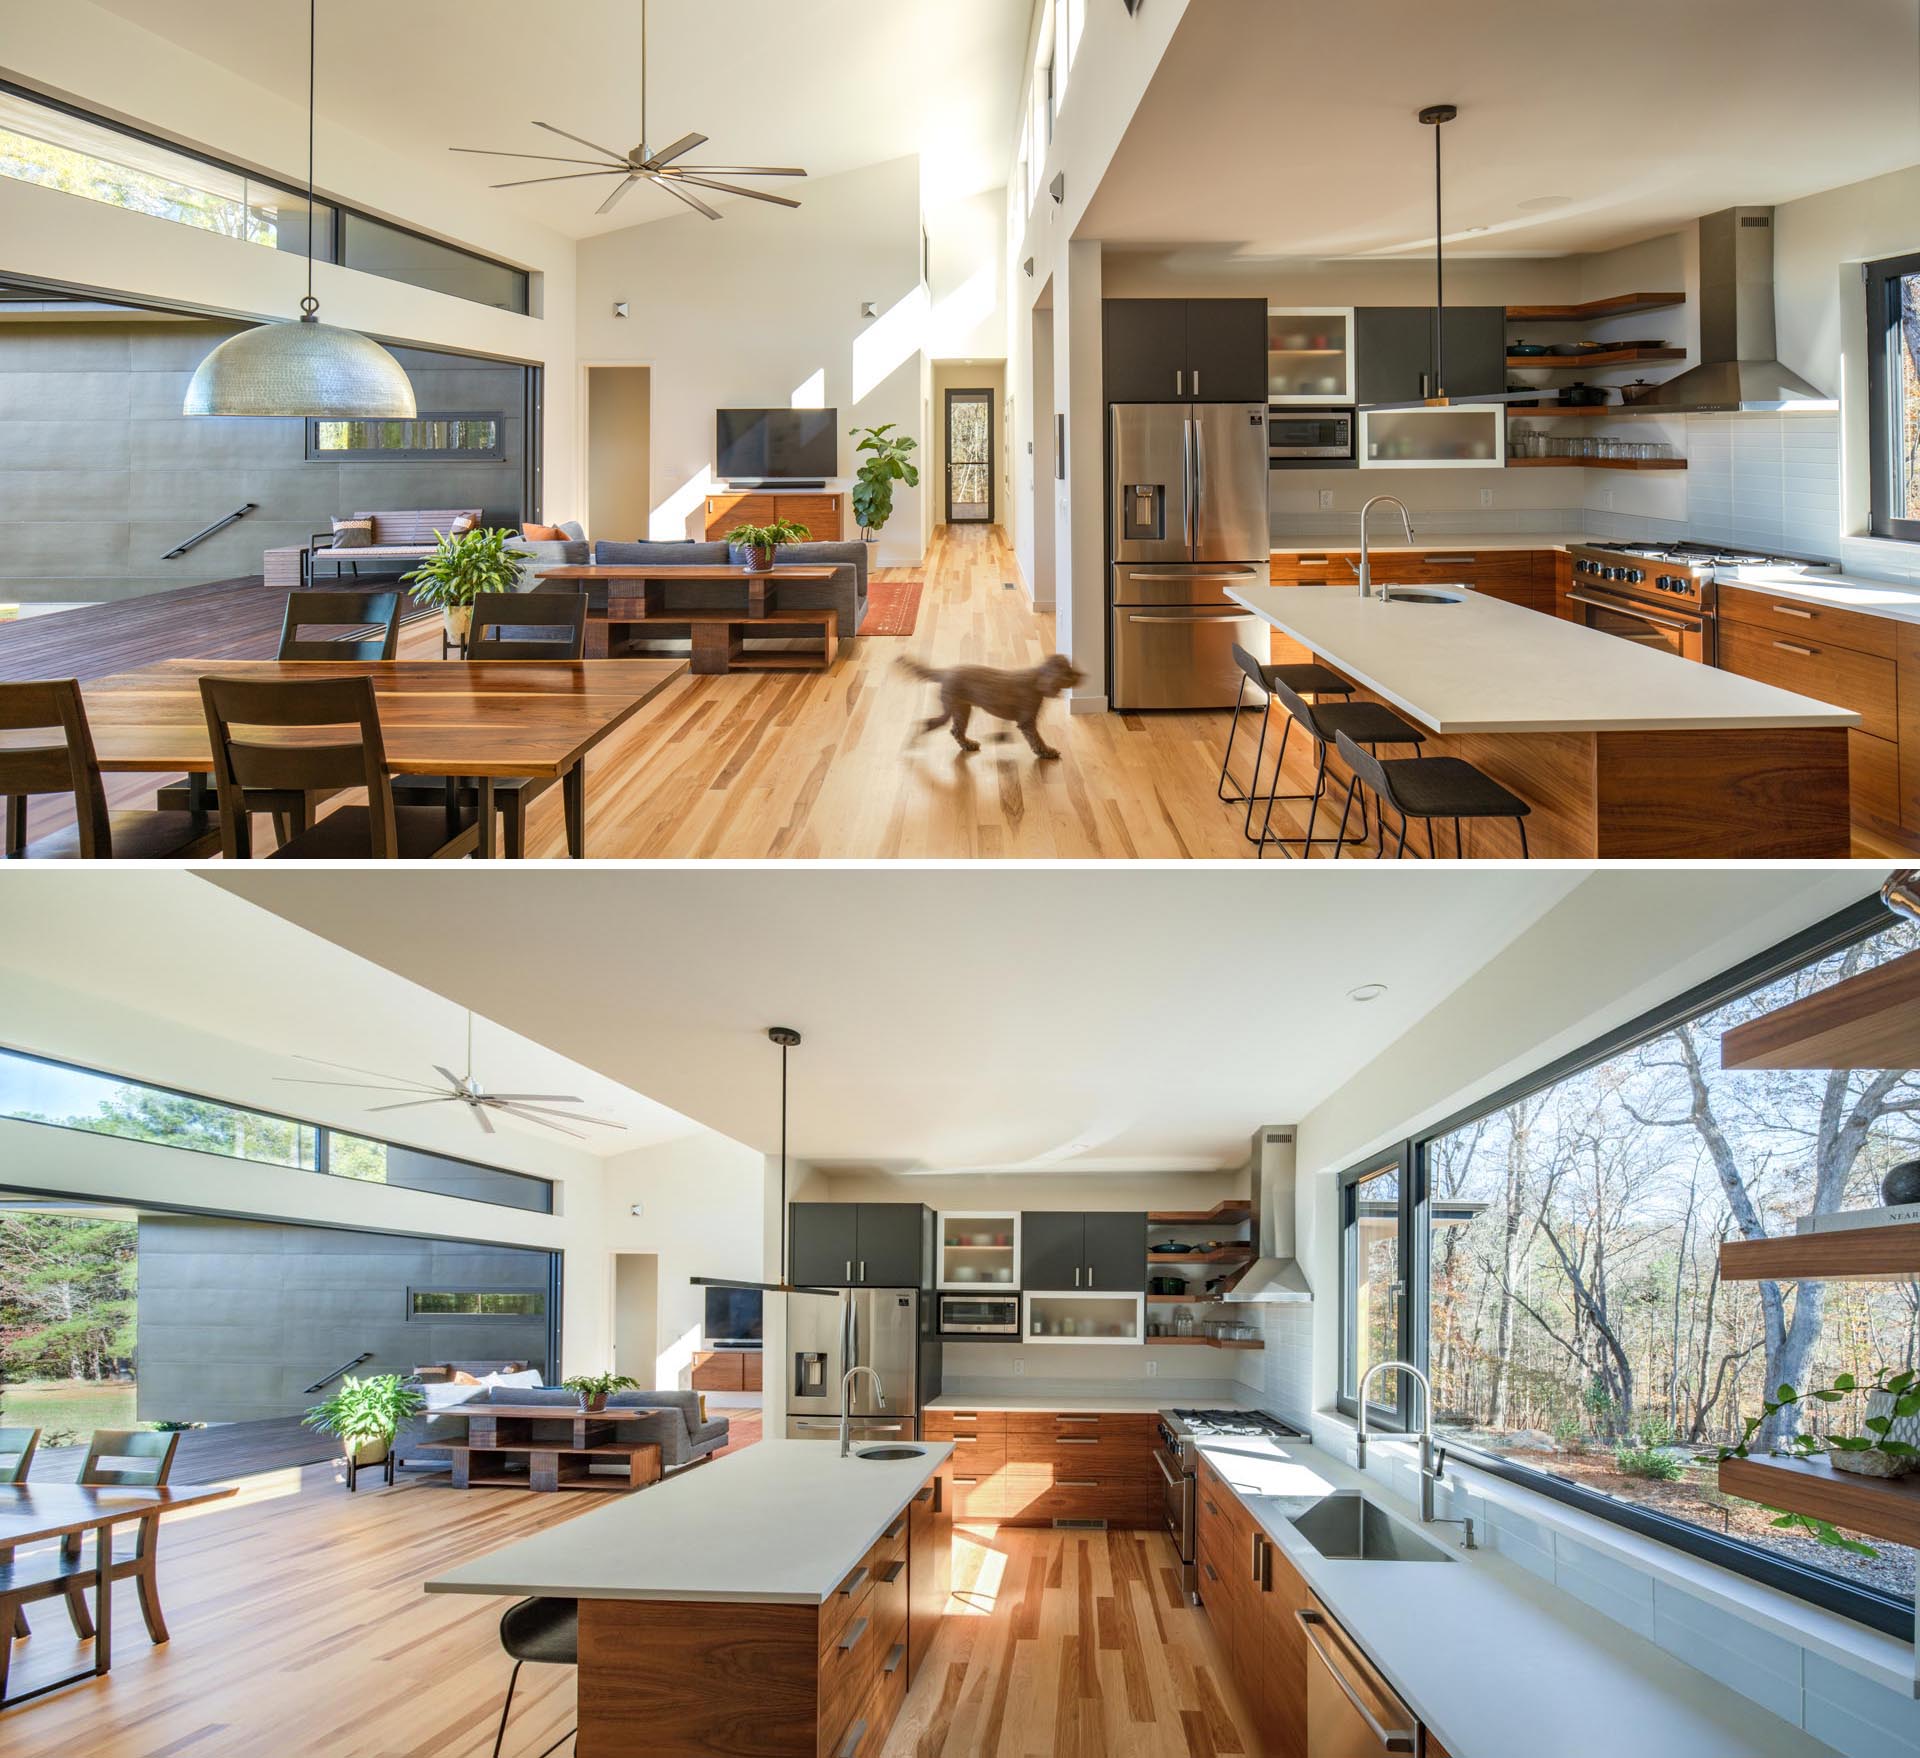 The kitchen in this modern home is adjacent to the living room and dining room, and includes an island with wood cabinetry and white countertops.